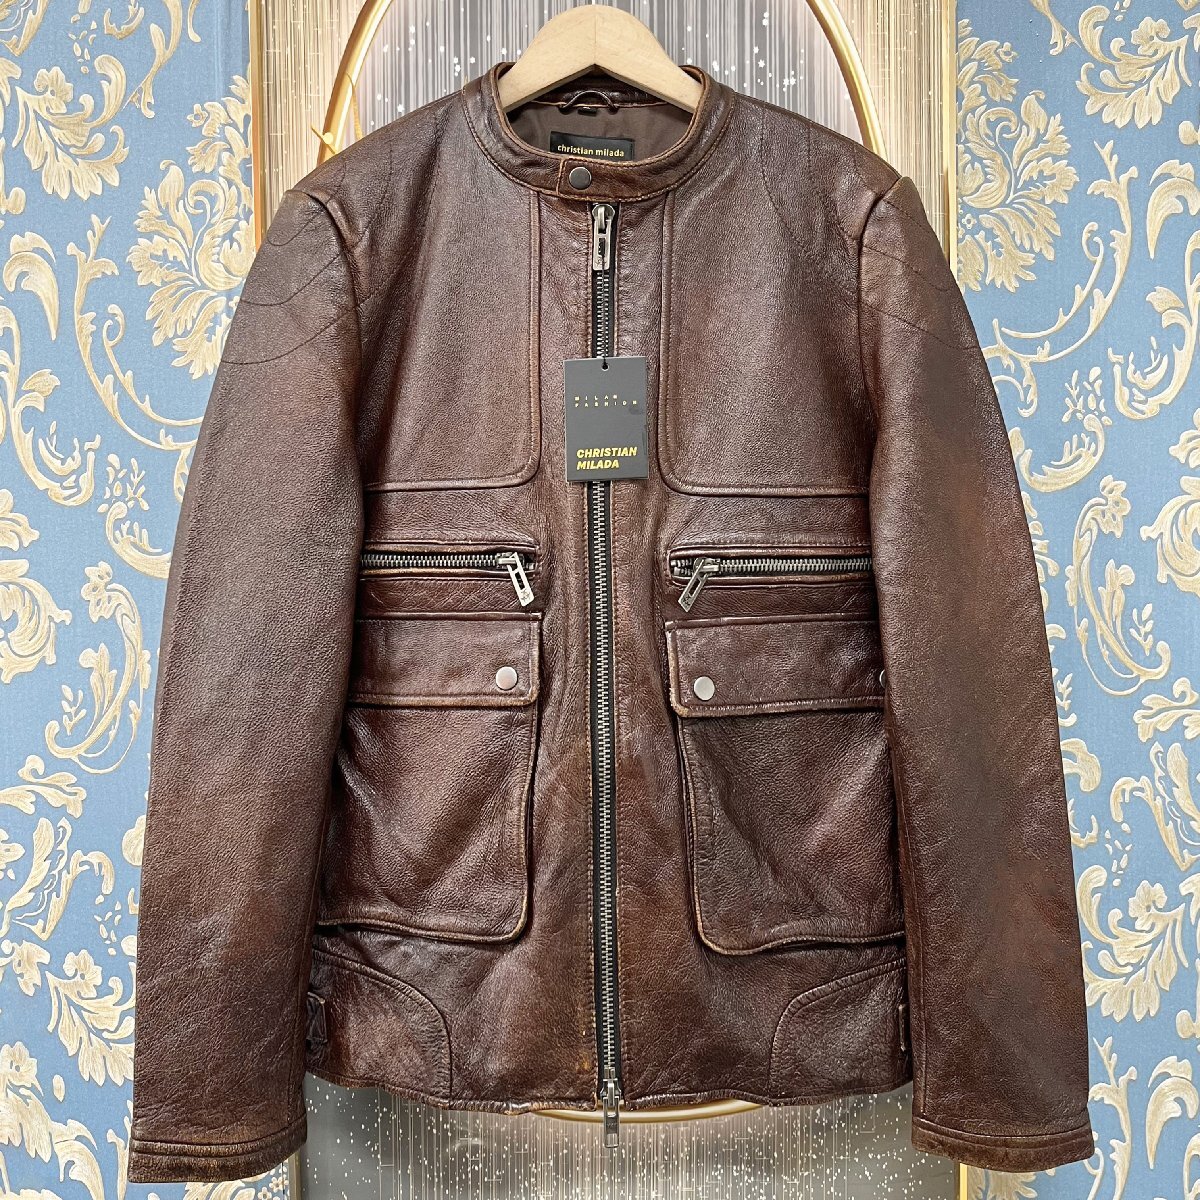  one sheets limitation regular price 15 ten thousand *christian milada* milano departure * leather jacket * high class cow leather piece . Rider's leather jacket original leather bike coat outer L/48